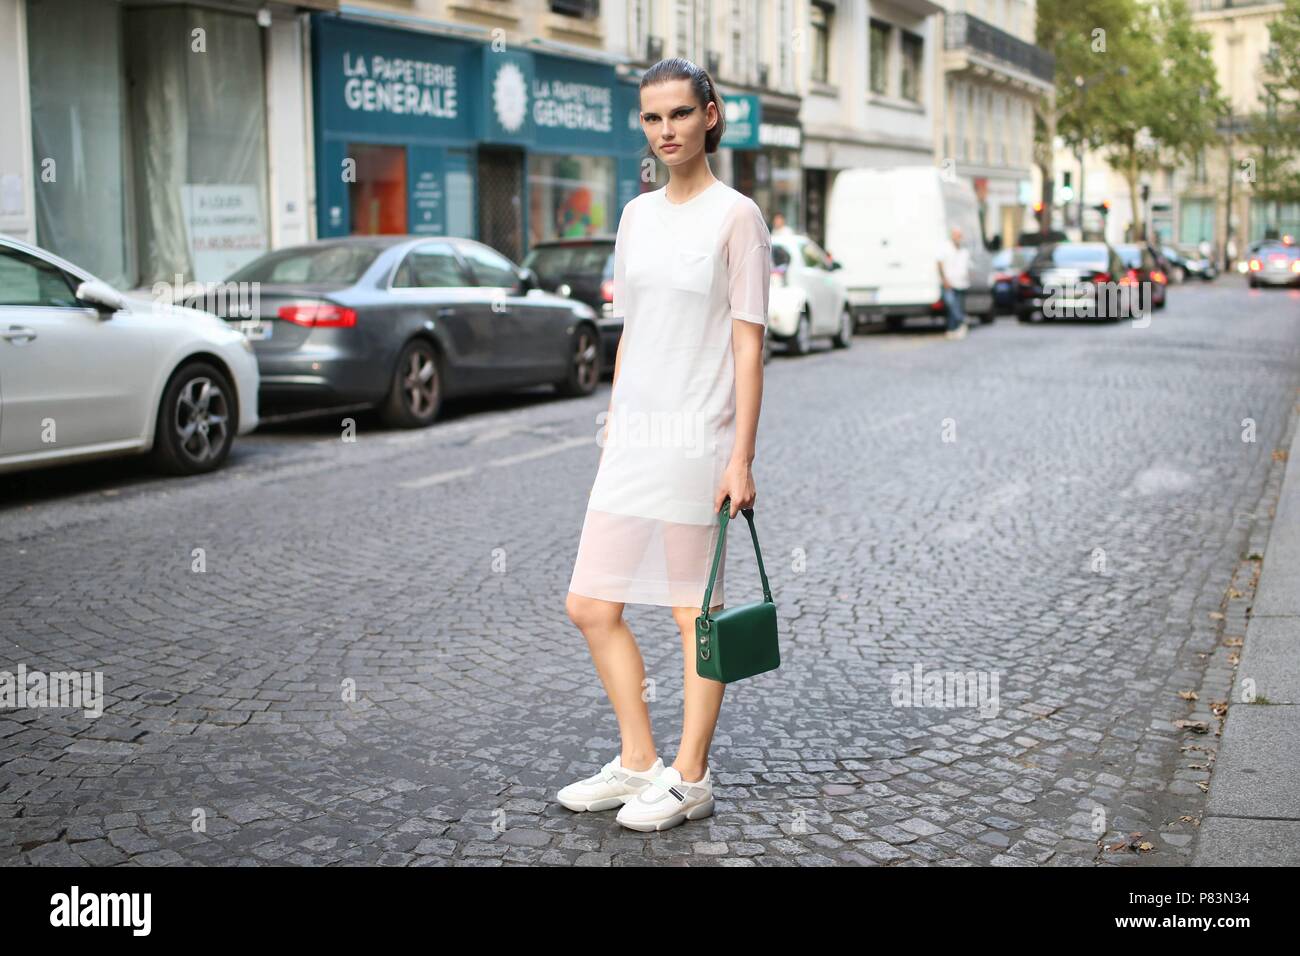 valentino sneakers street style